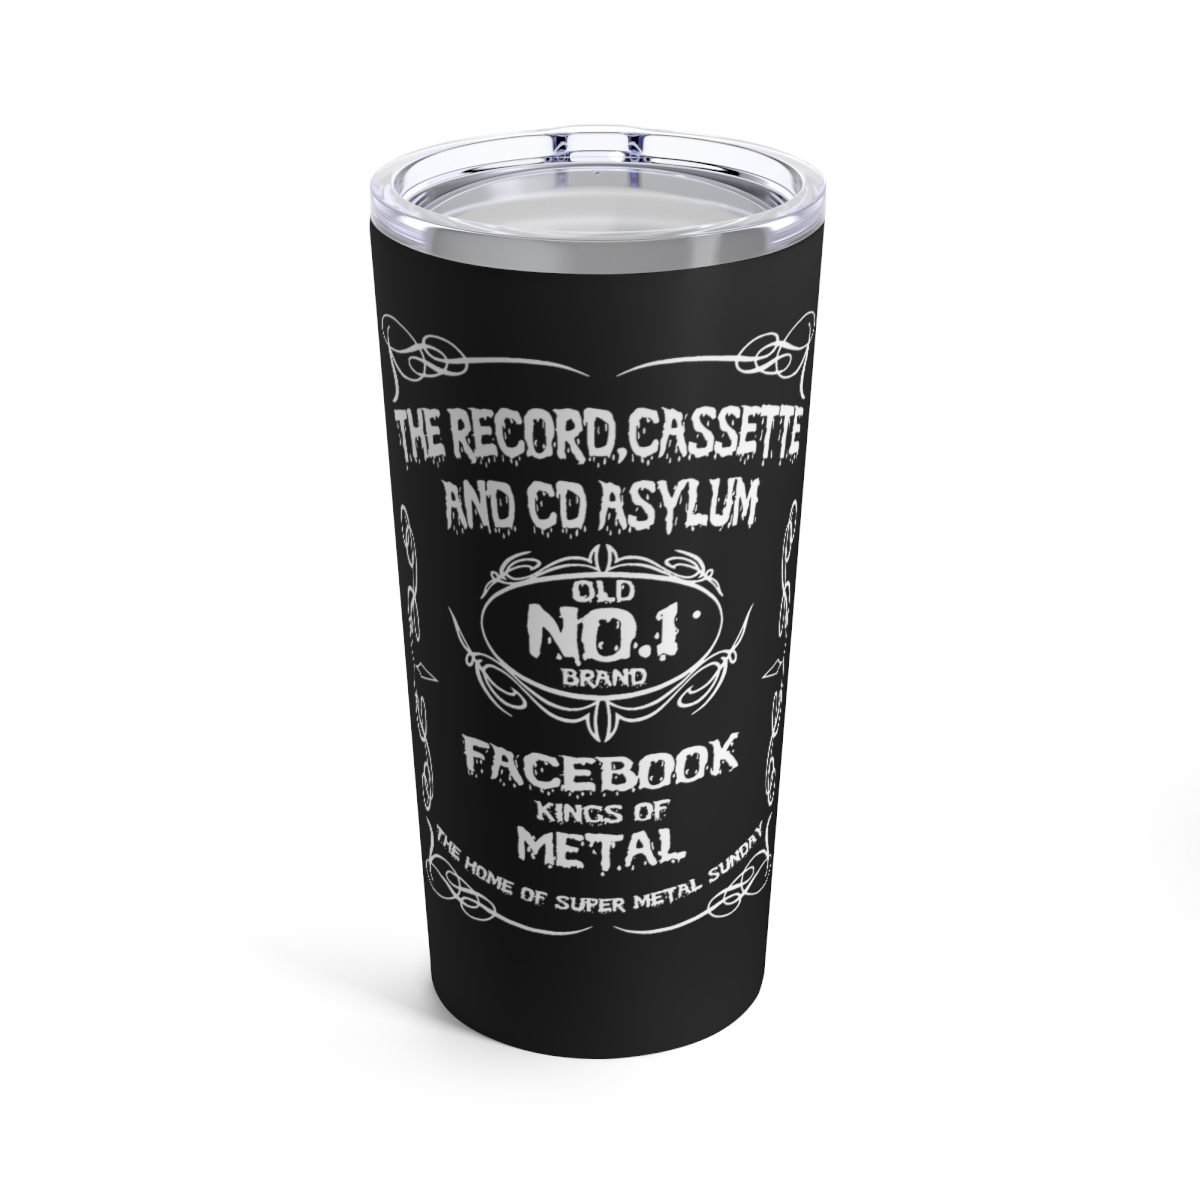 The Record, Cassette, and CD Asylum – Facebook Kings 20oz Stainless Steel Tumbler